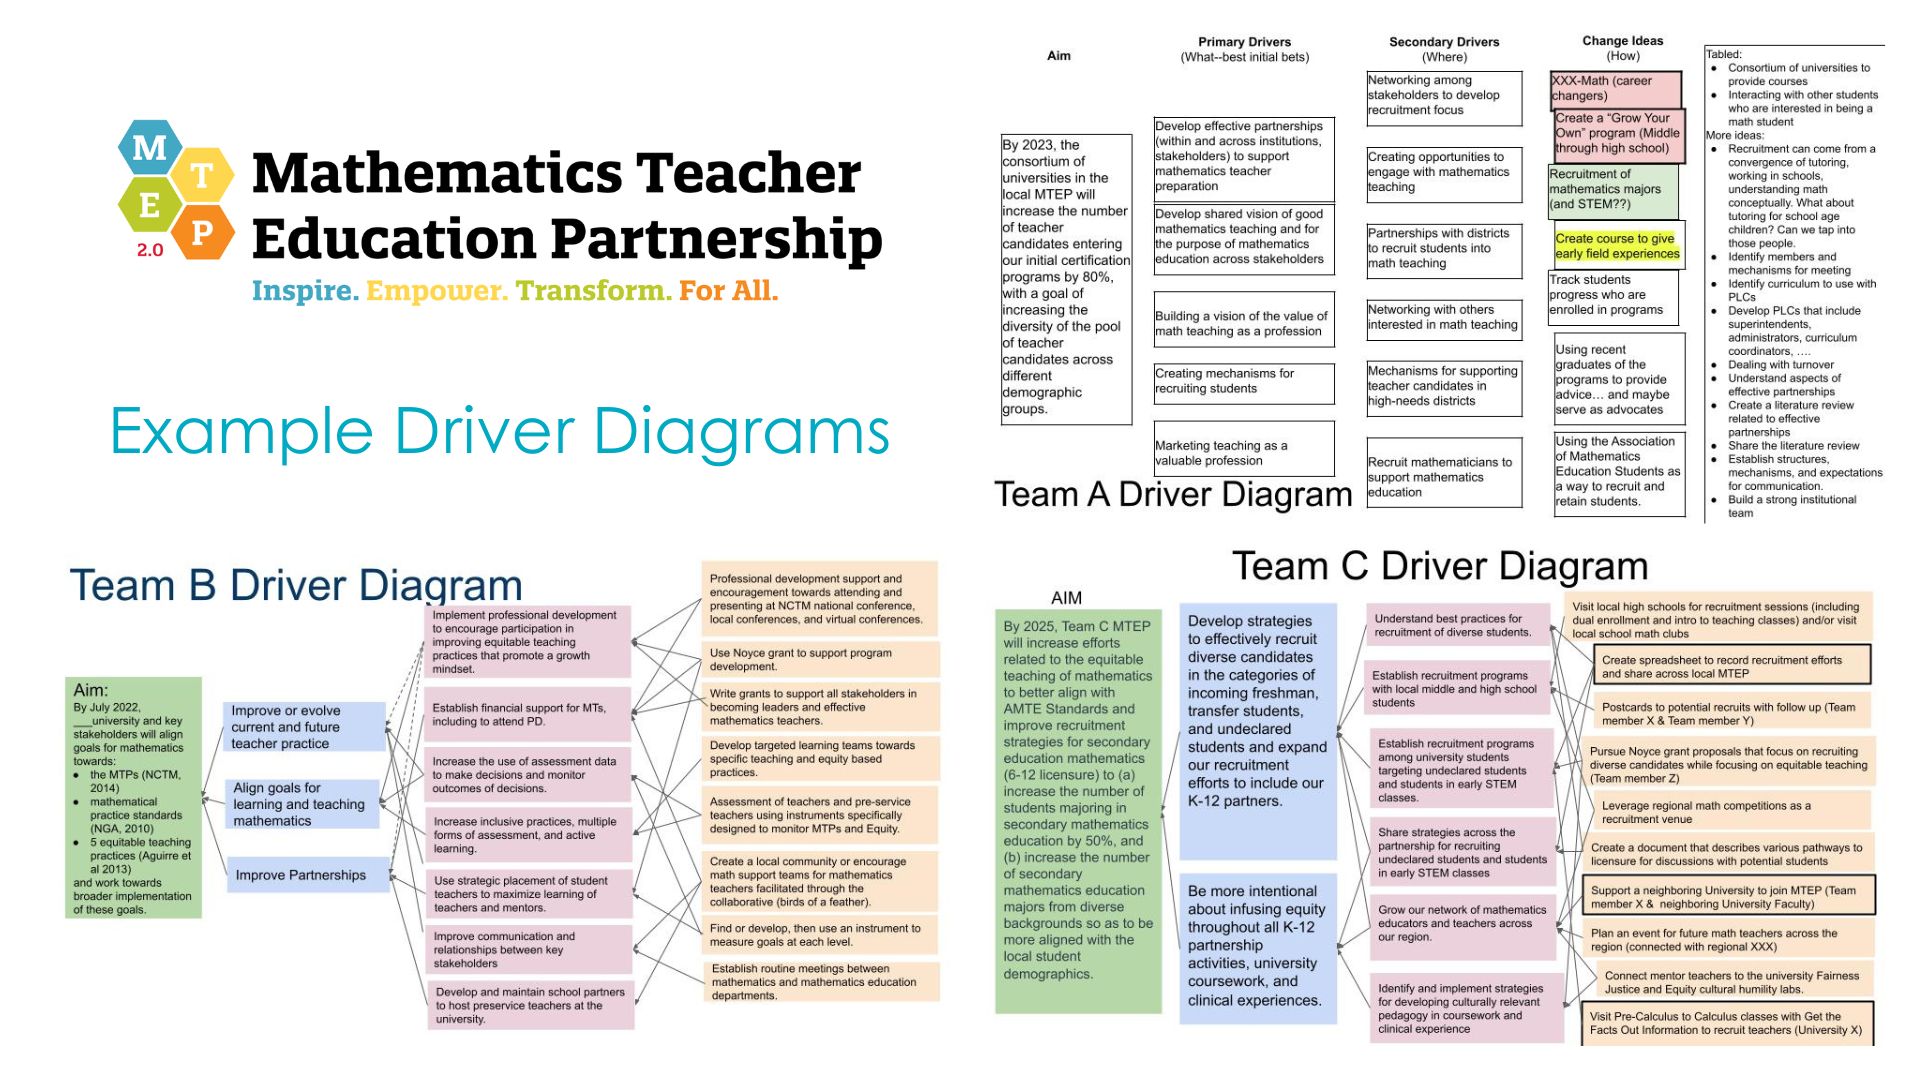 The three example driver diagrams employed a variety of features to capture each team’s theory of change.